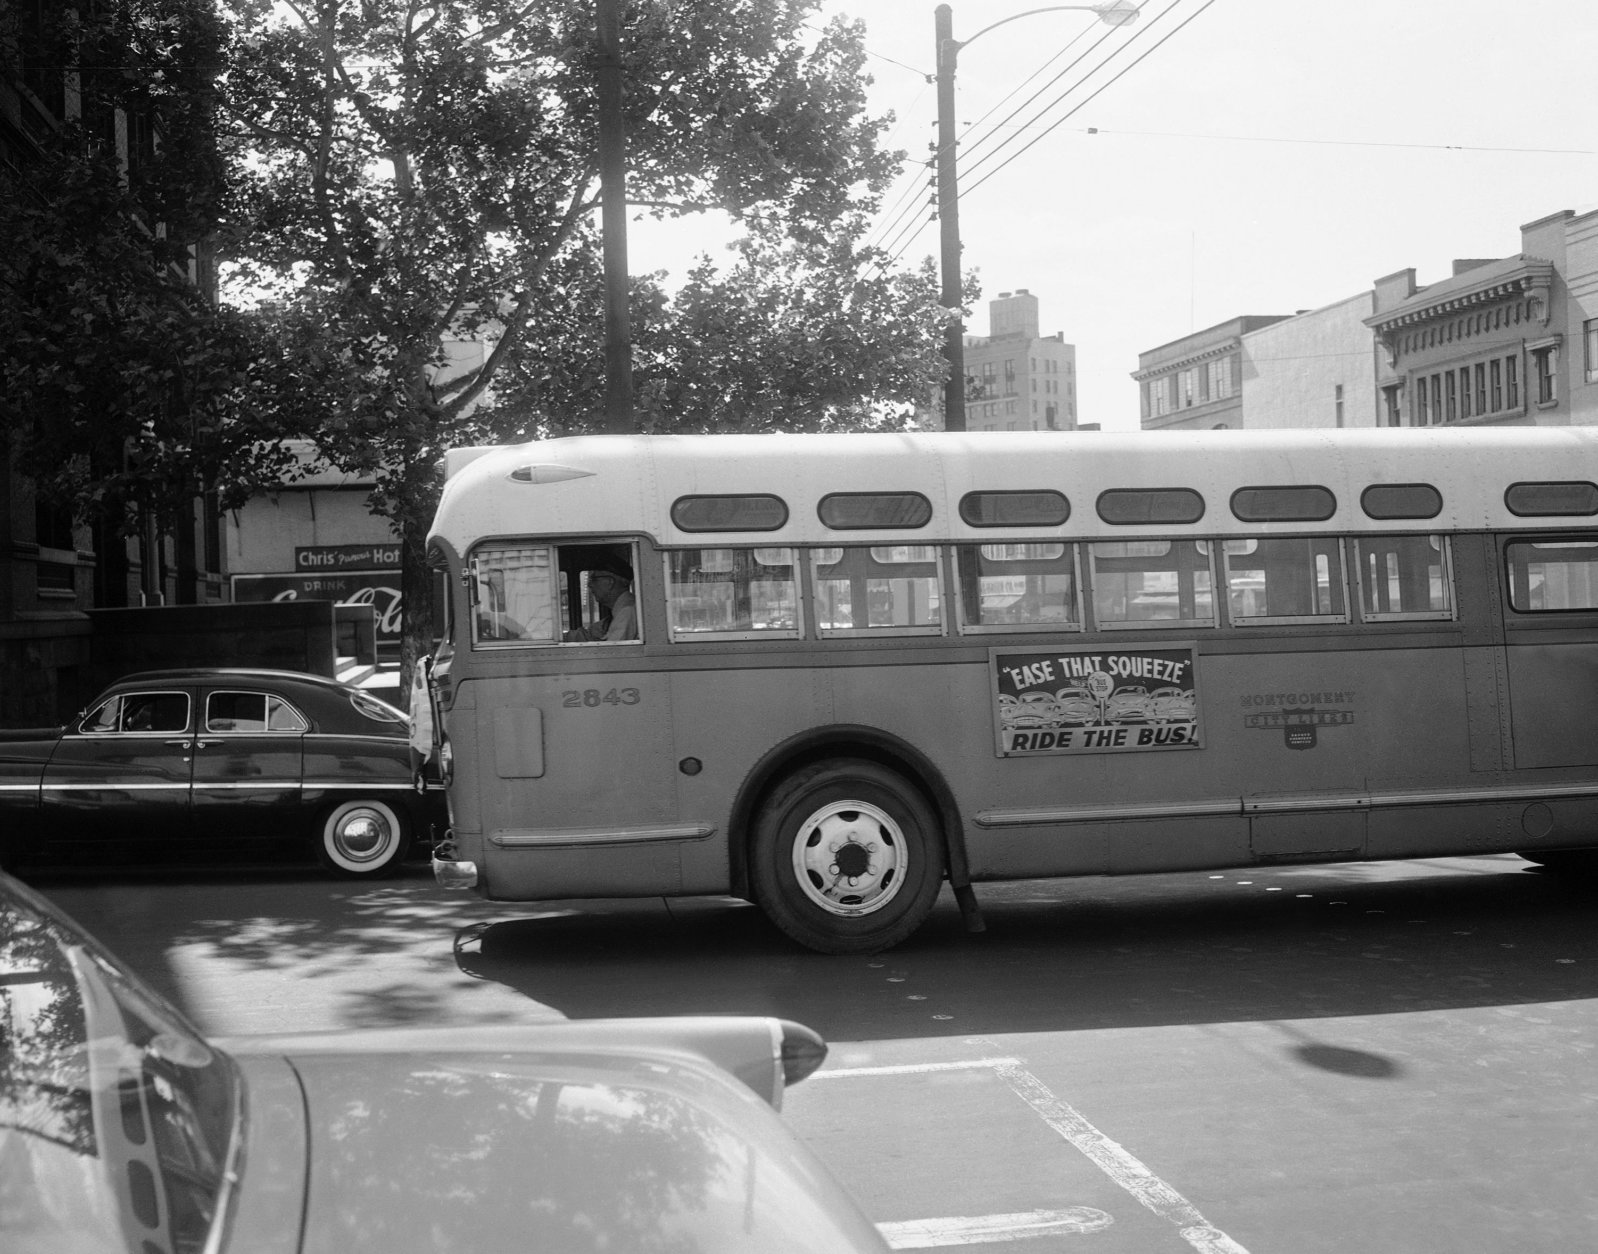 FILE - In this April 26, 1956, file photo, a bus driver is all alone as his empty bus moves through downtown Montgomery, Ala, as a boycott continues even though the bus company has ordered an end to segregation. The 60th anniversary of the Montgomery bus boycott is widely credited with helping spark the modern civil rights movement. (AP Photo/Horace Cort, file)